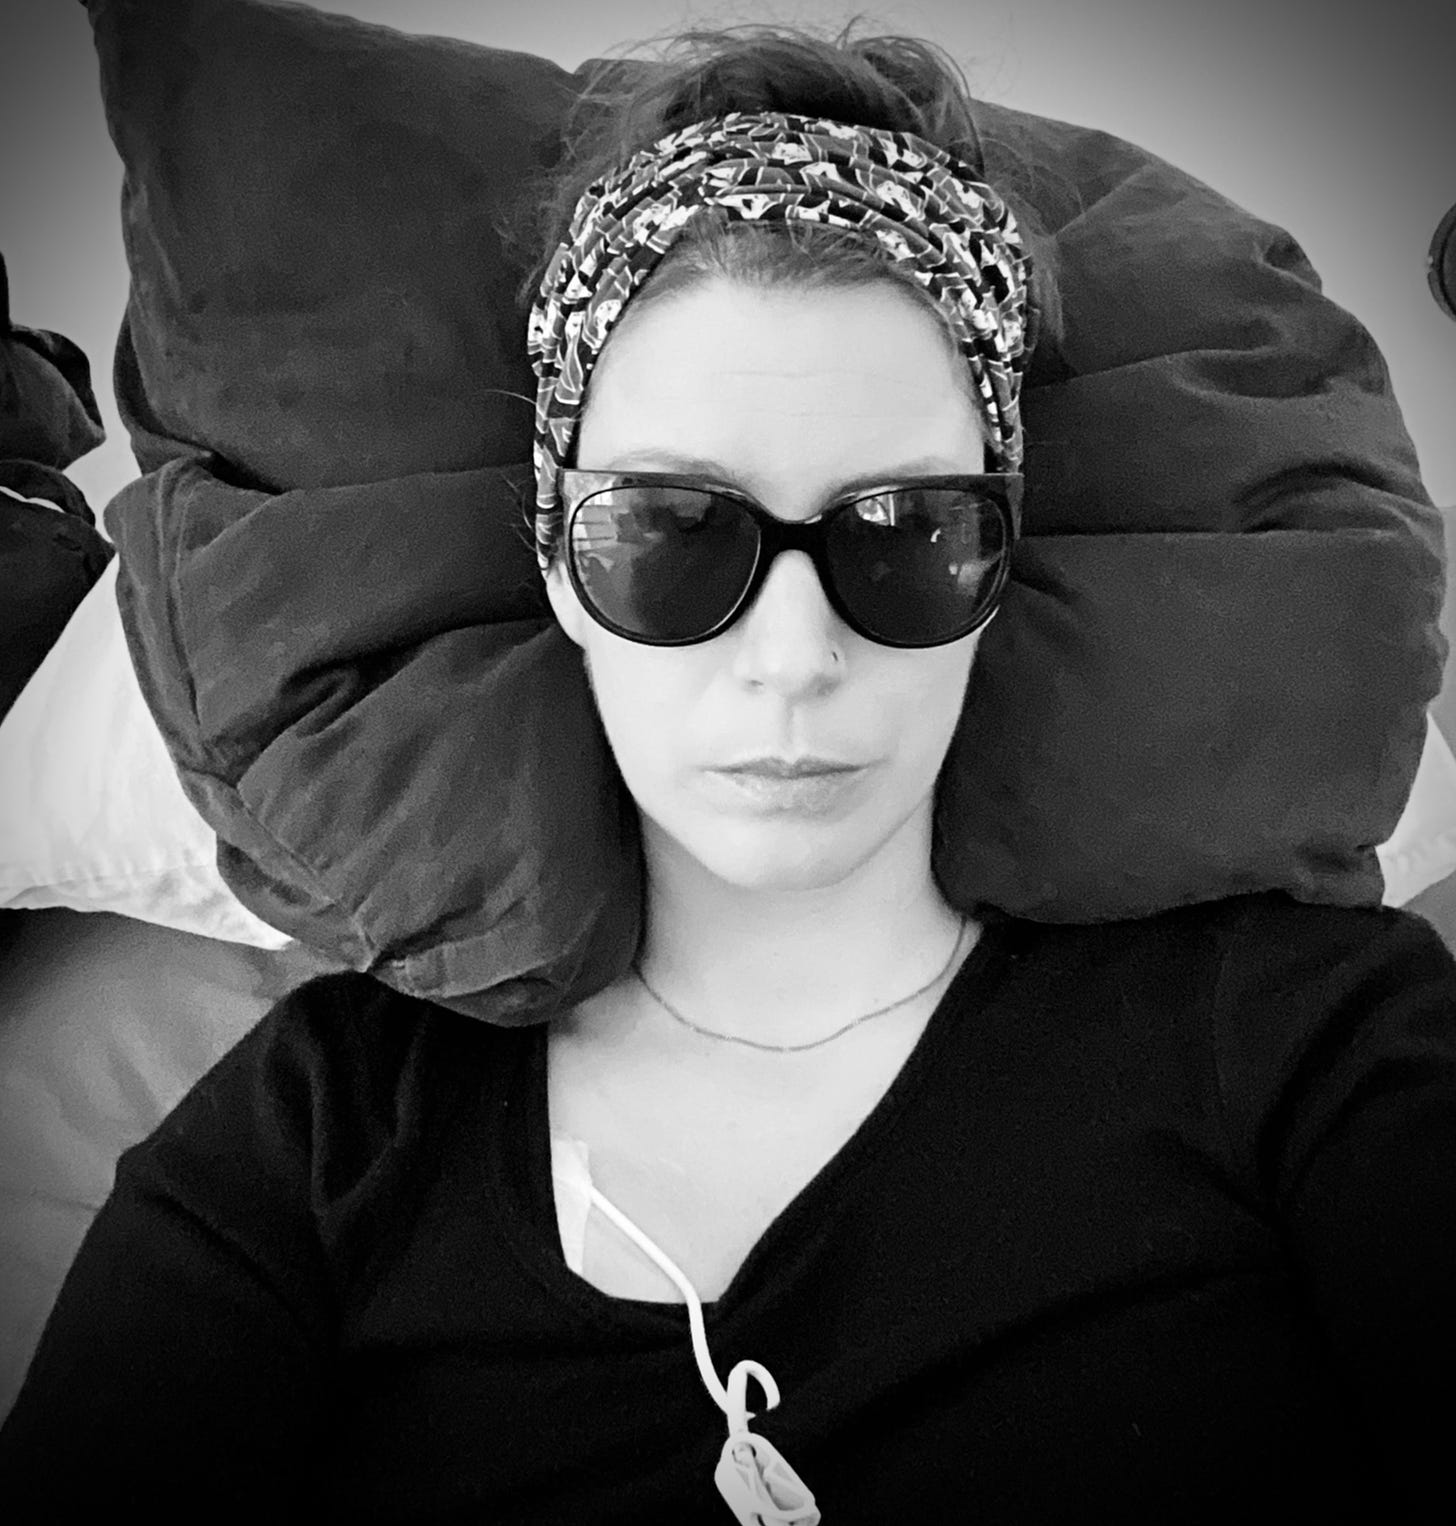 A white woman living with severe ME/CFS is lying in bed wearing sunglasses because of light sensitivity